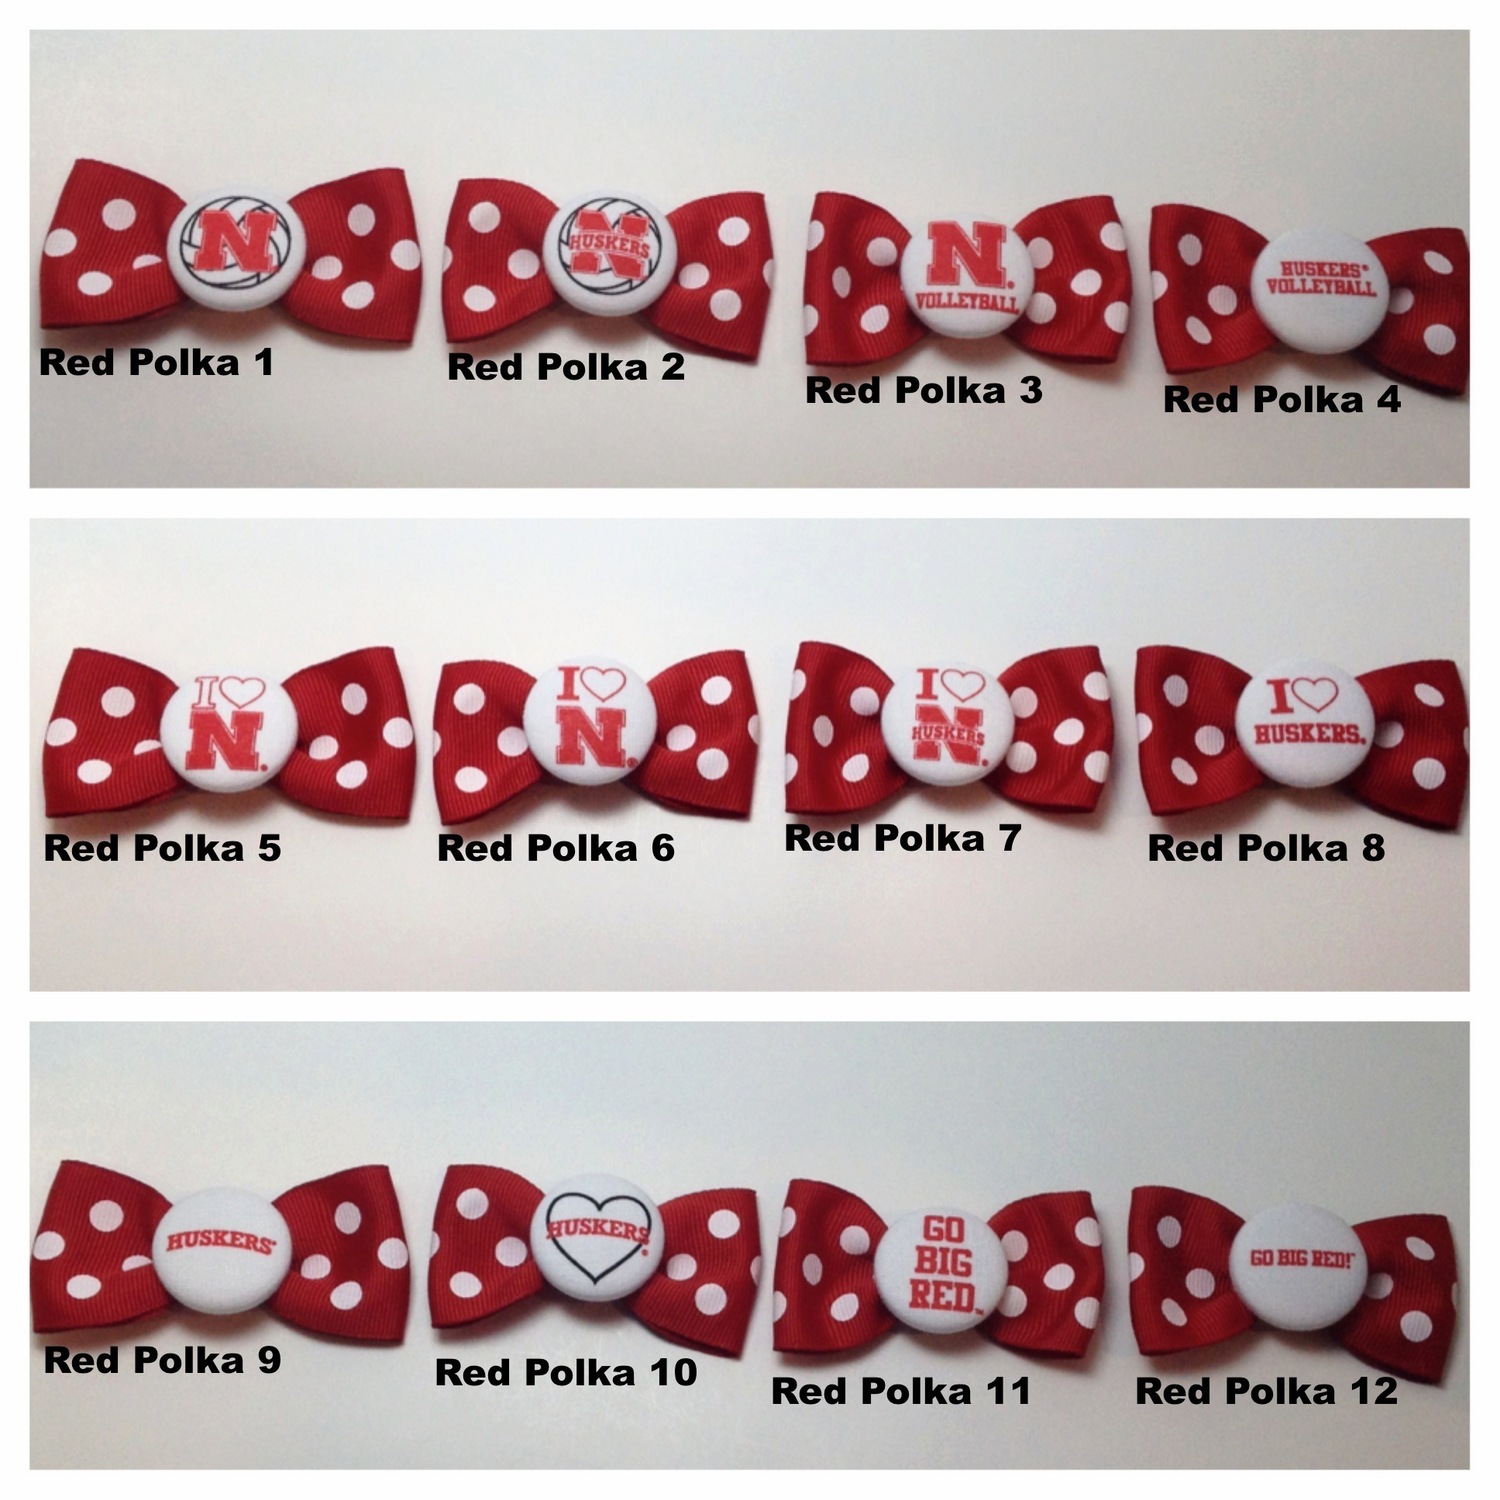 Huskers, Red And White Large Layered Hair Bow